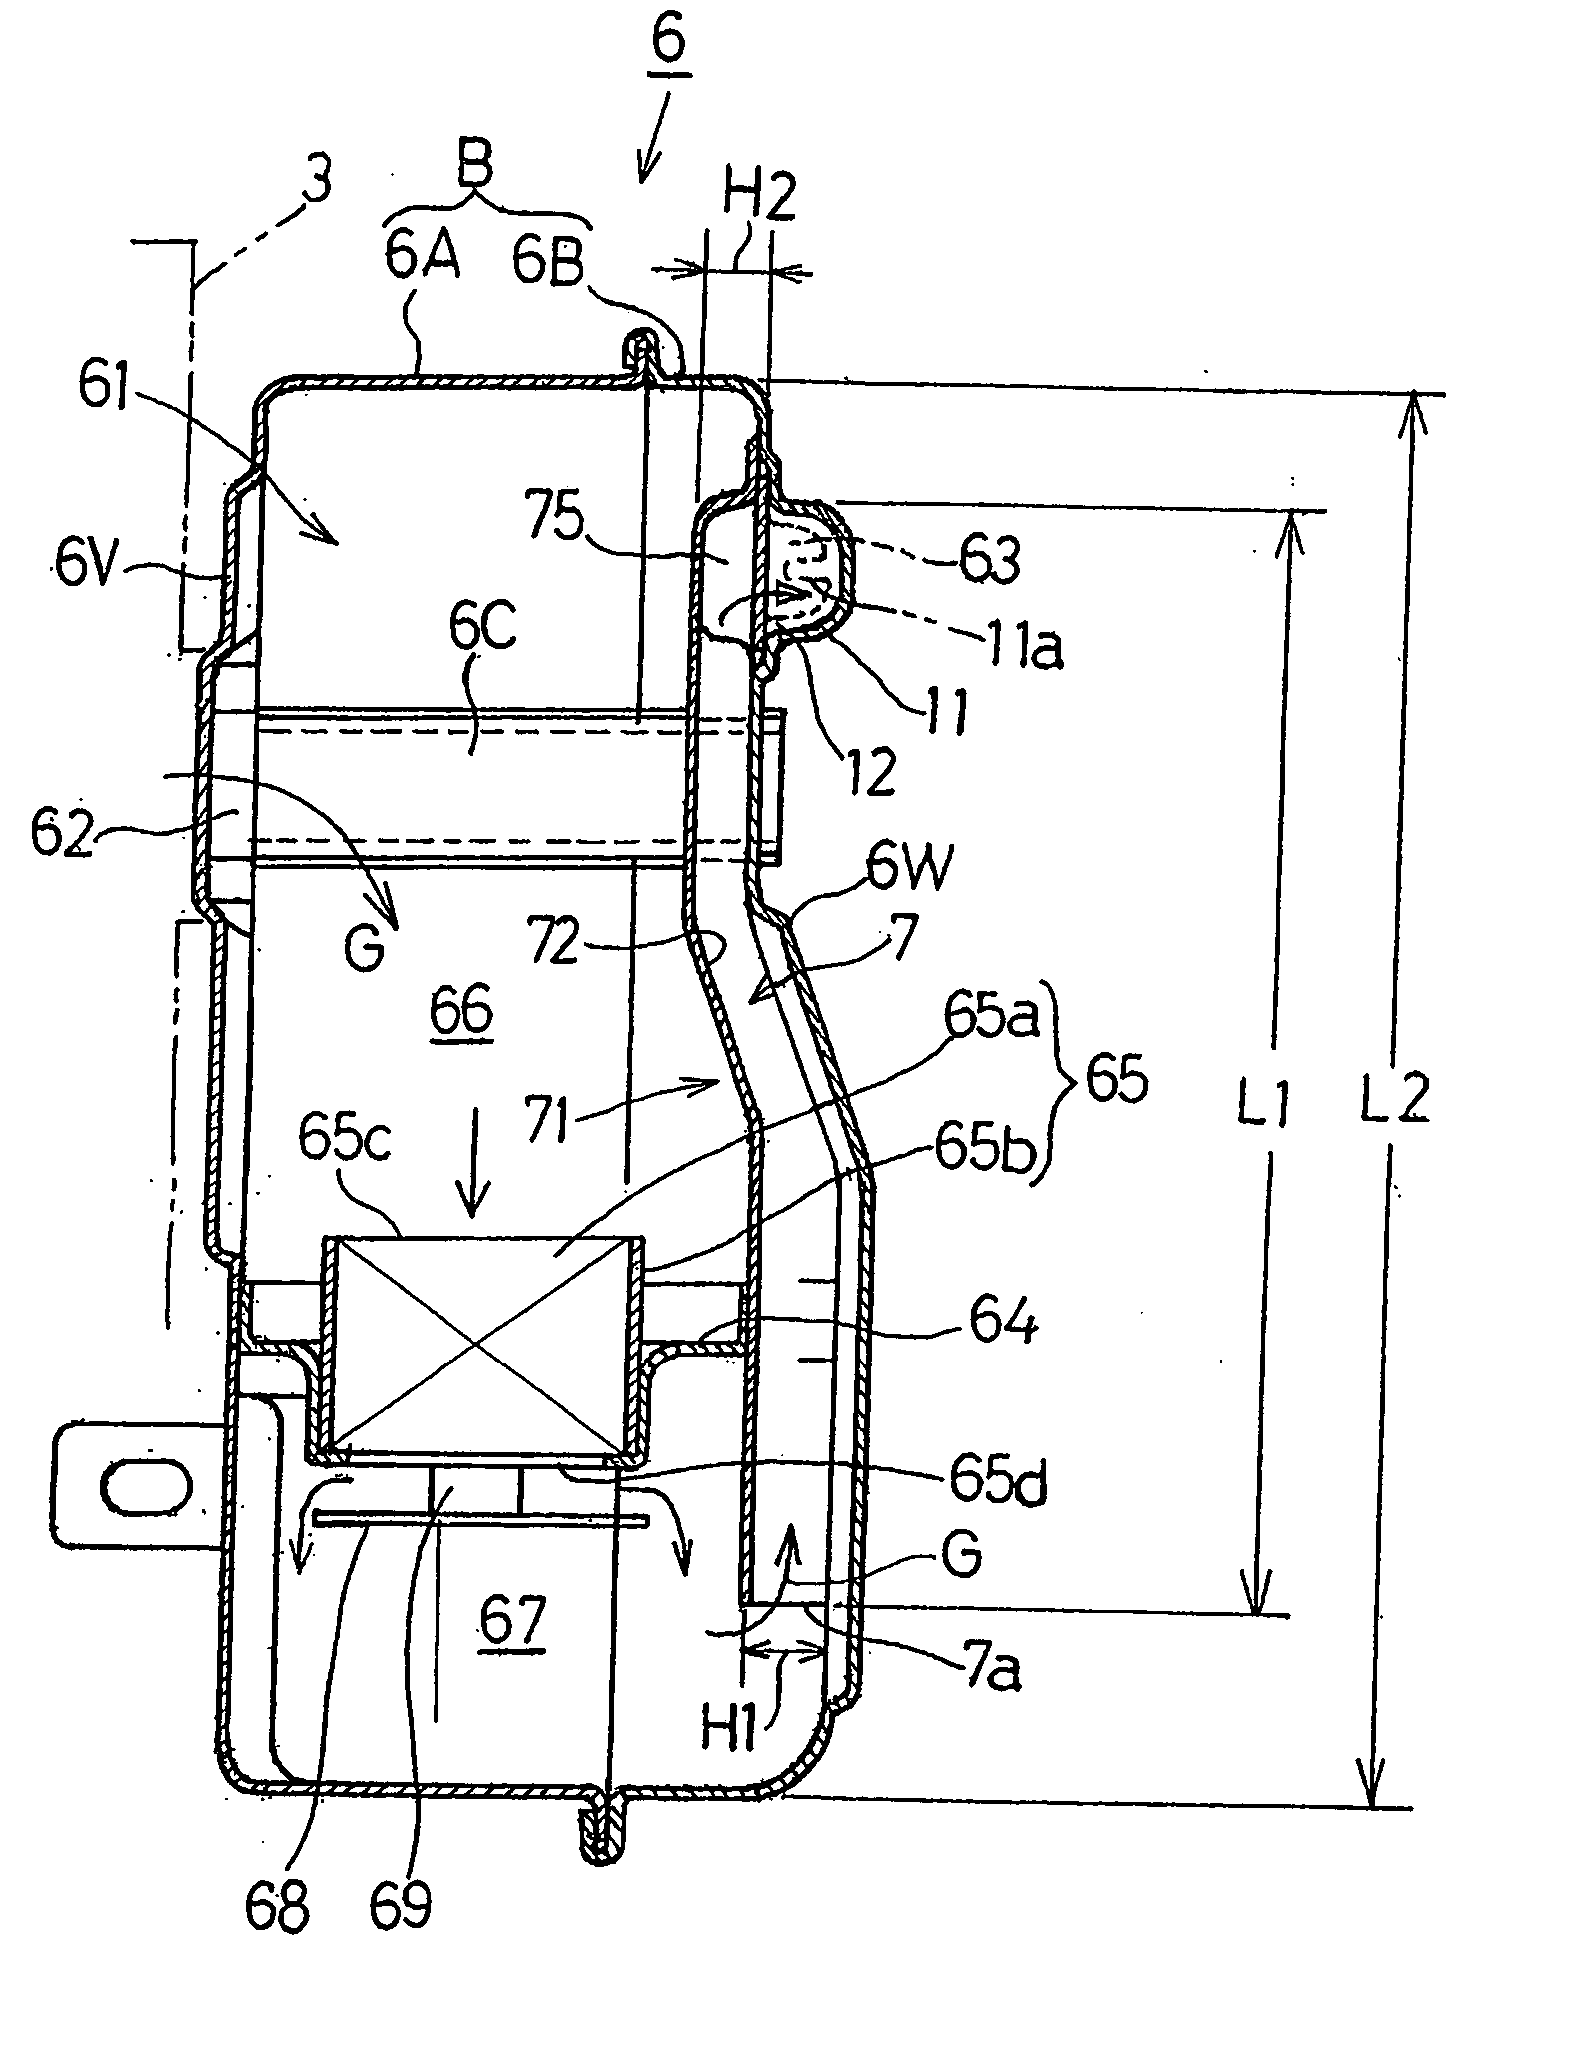 Muffler for compact combustion engines